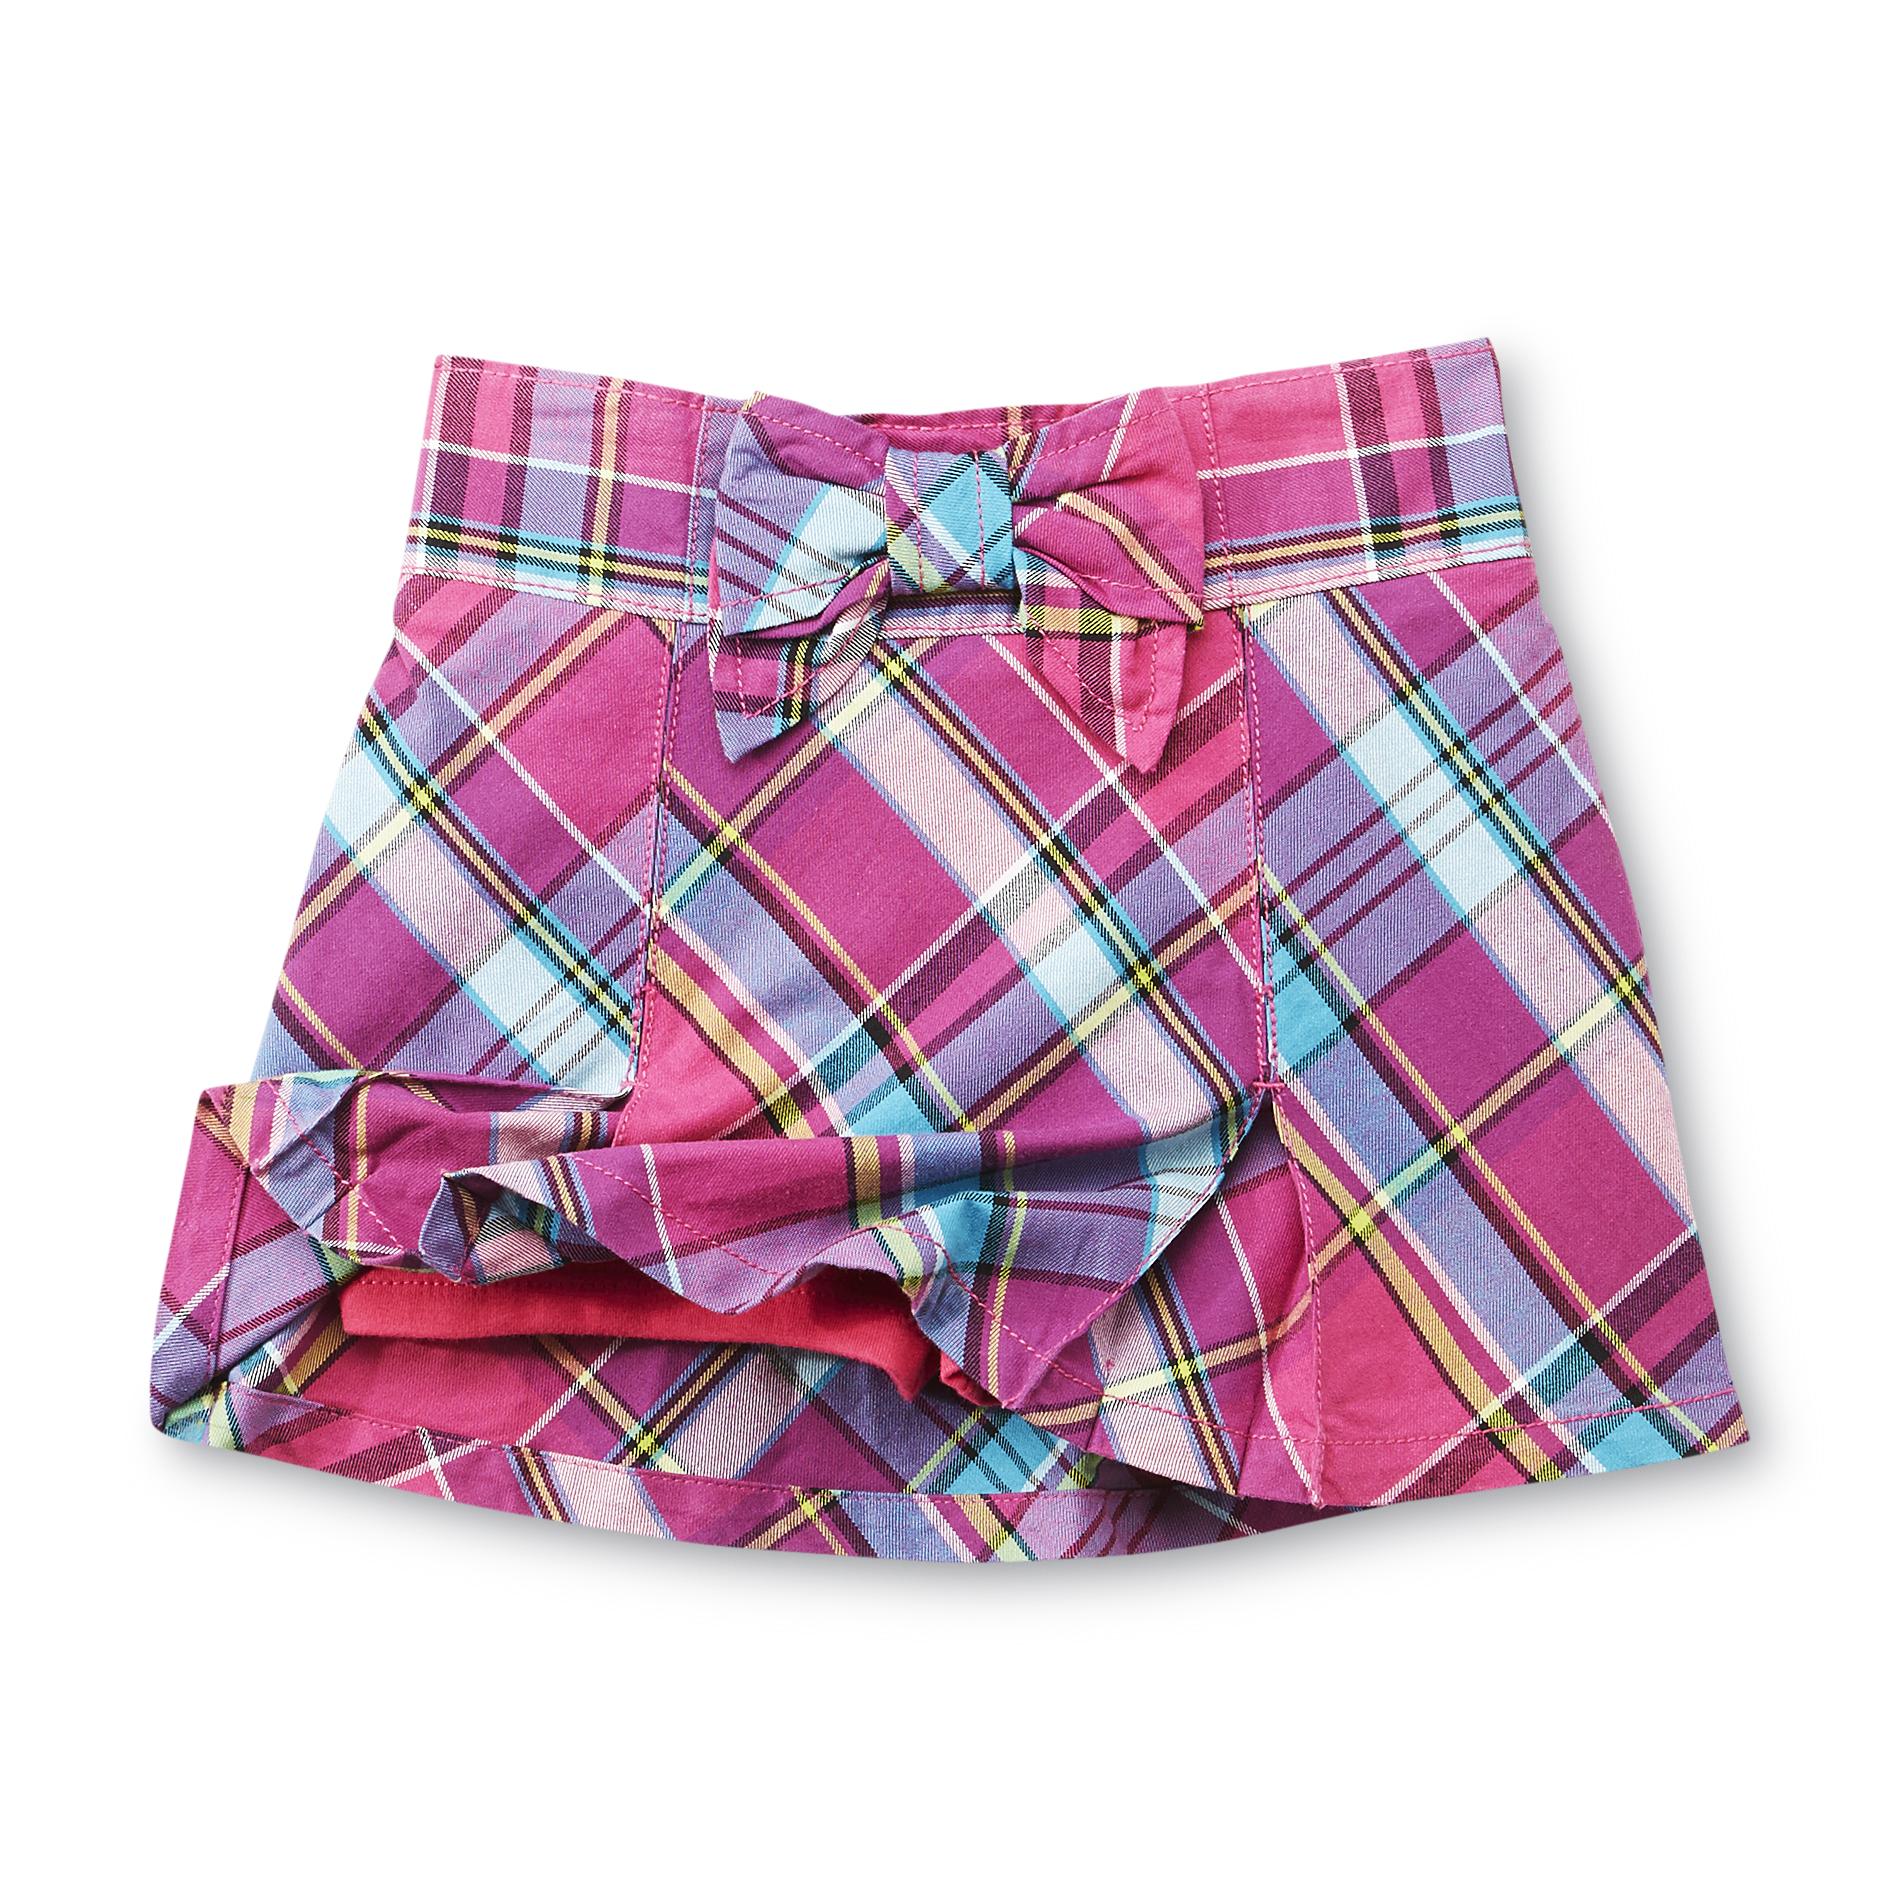 Toughskins Infant & Toddler Girl's Pleated Scooter Skirt - Plaid